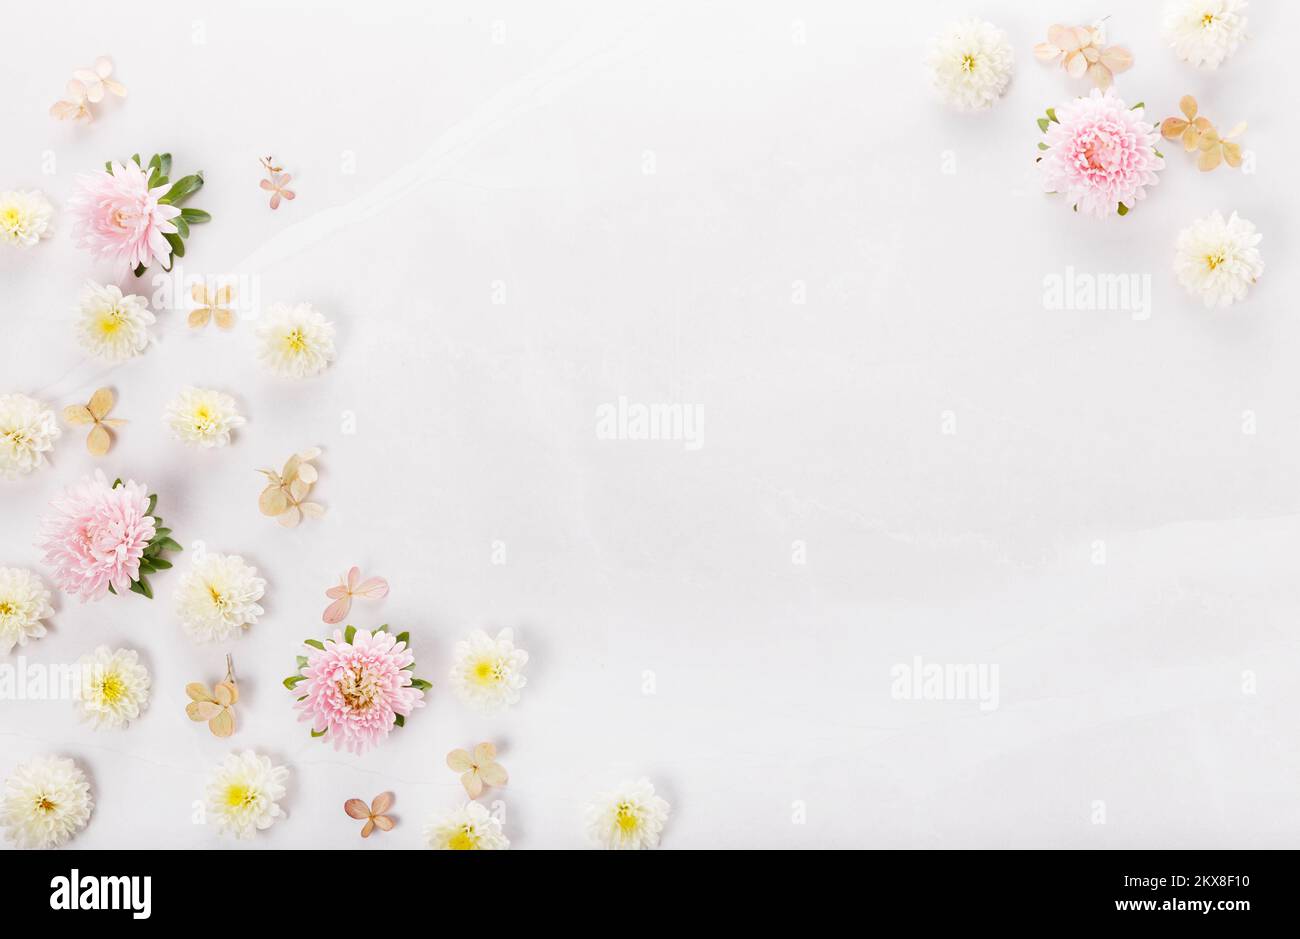 Frame of small flowers and daisy, floral arrangement Stock Photo